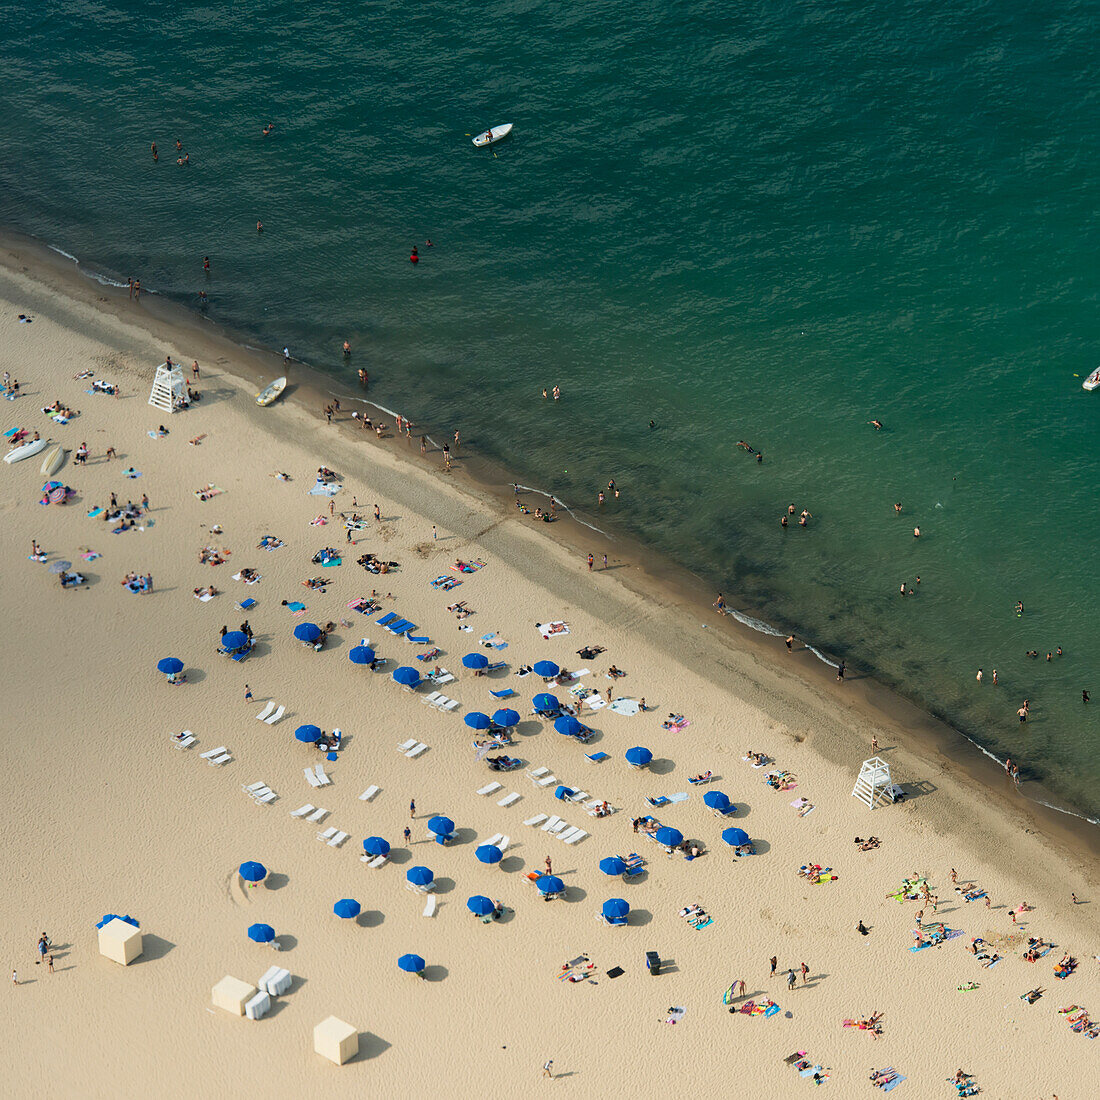 High Angle View Of Chairs And Umbrellas On The Beach Along Lake Michigan; Chicago Illinois Vereinigte Staaten Von Amerika